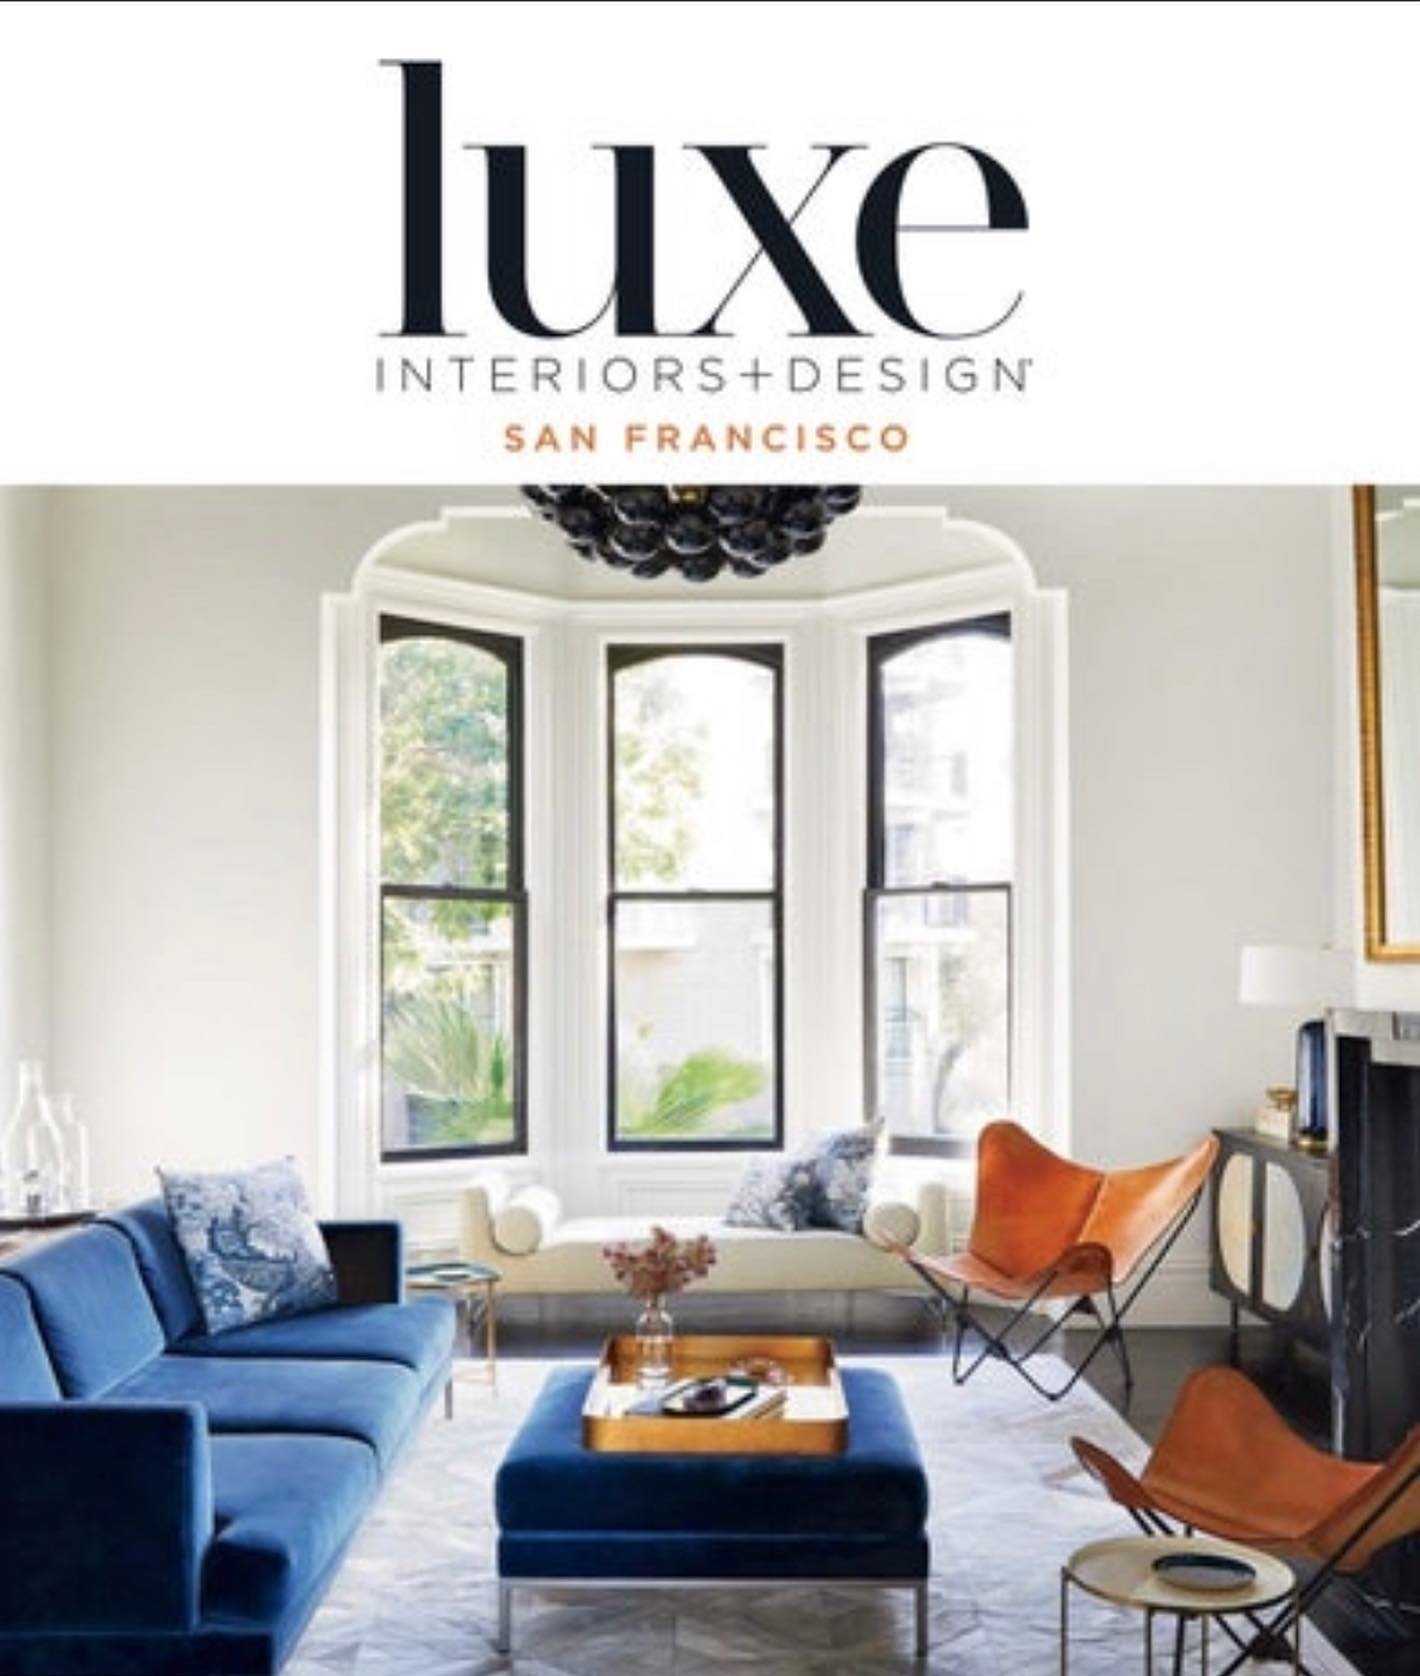 Exciting news! Make It Home was recently recommended in Luxe Magazine - a leading publication in the design industry for over 17 years